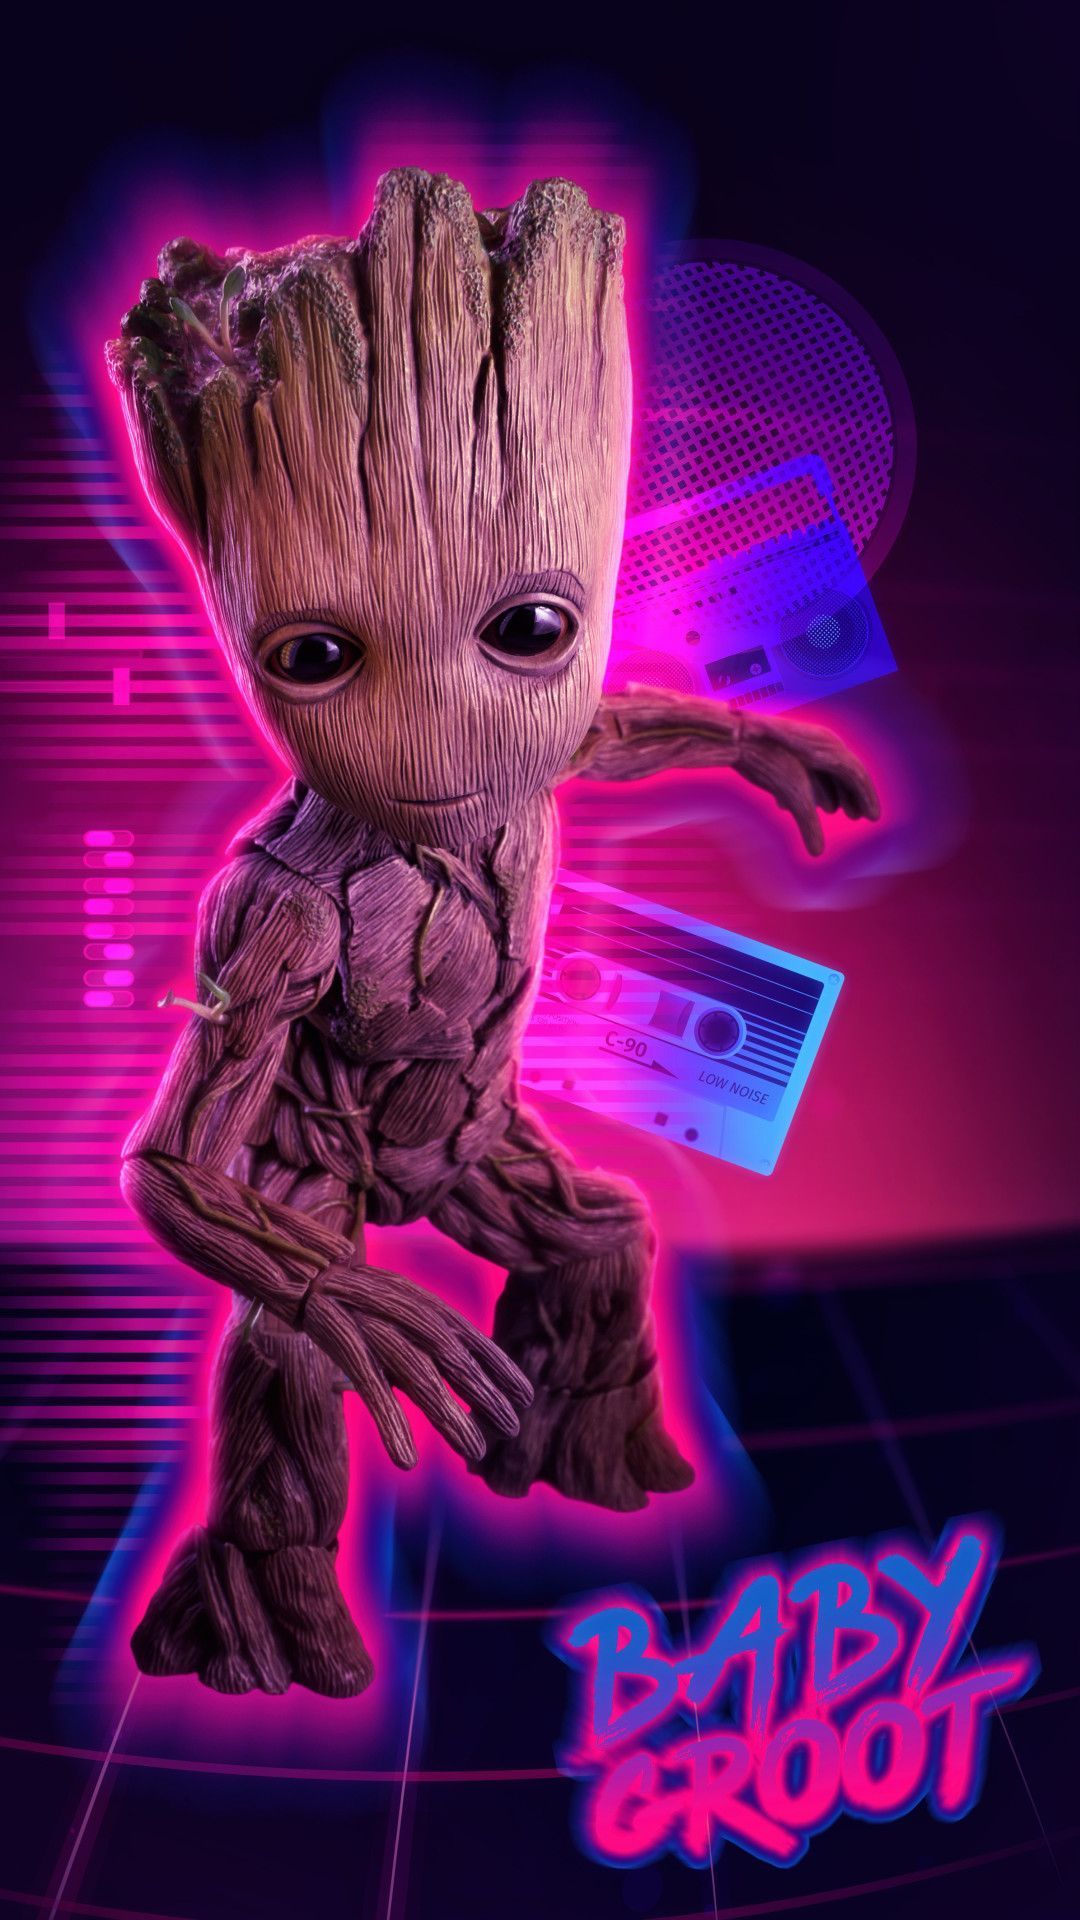 4k Baby Groot Mobile Wallpaper iPhone, Android, Samsung, Pixel